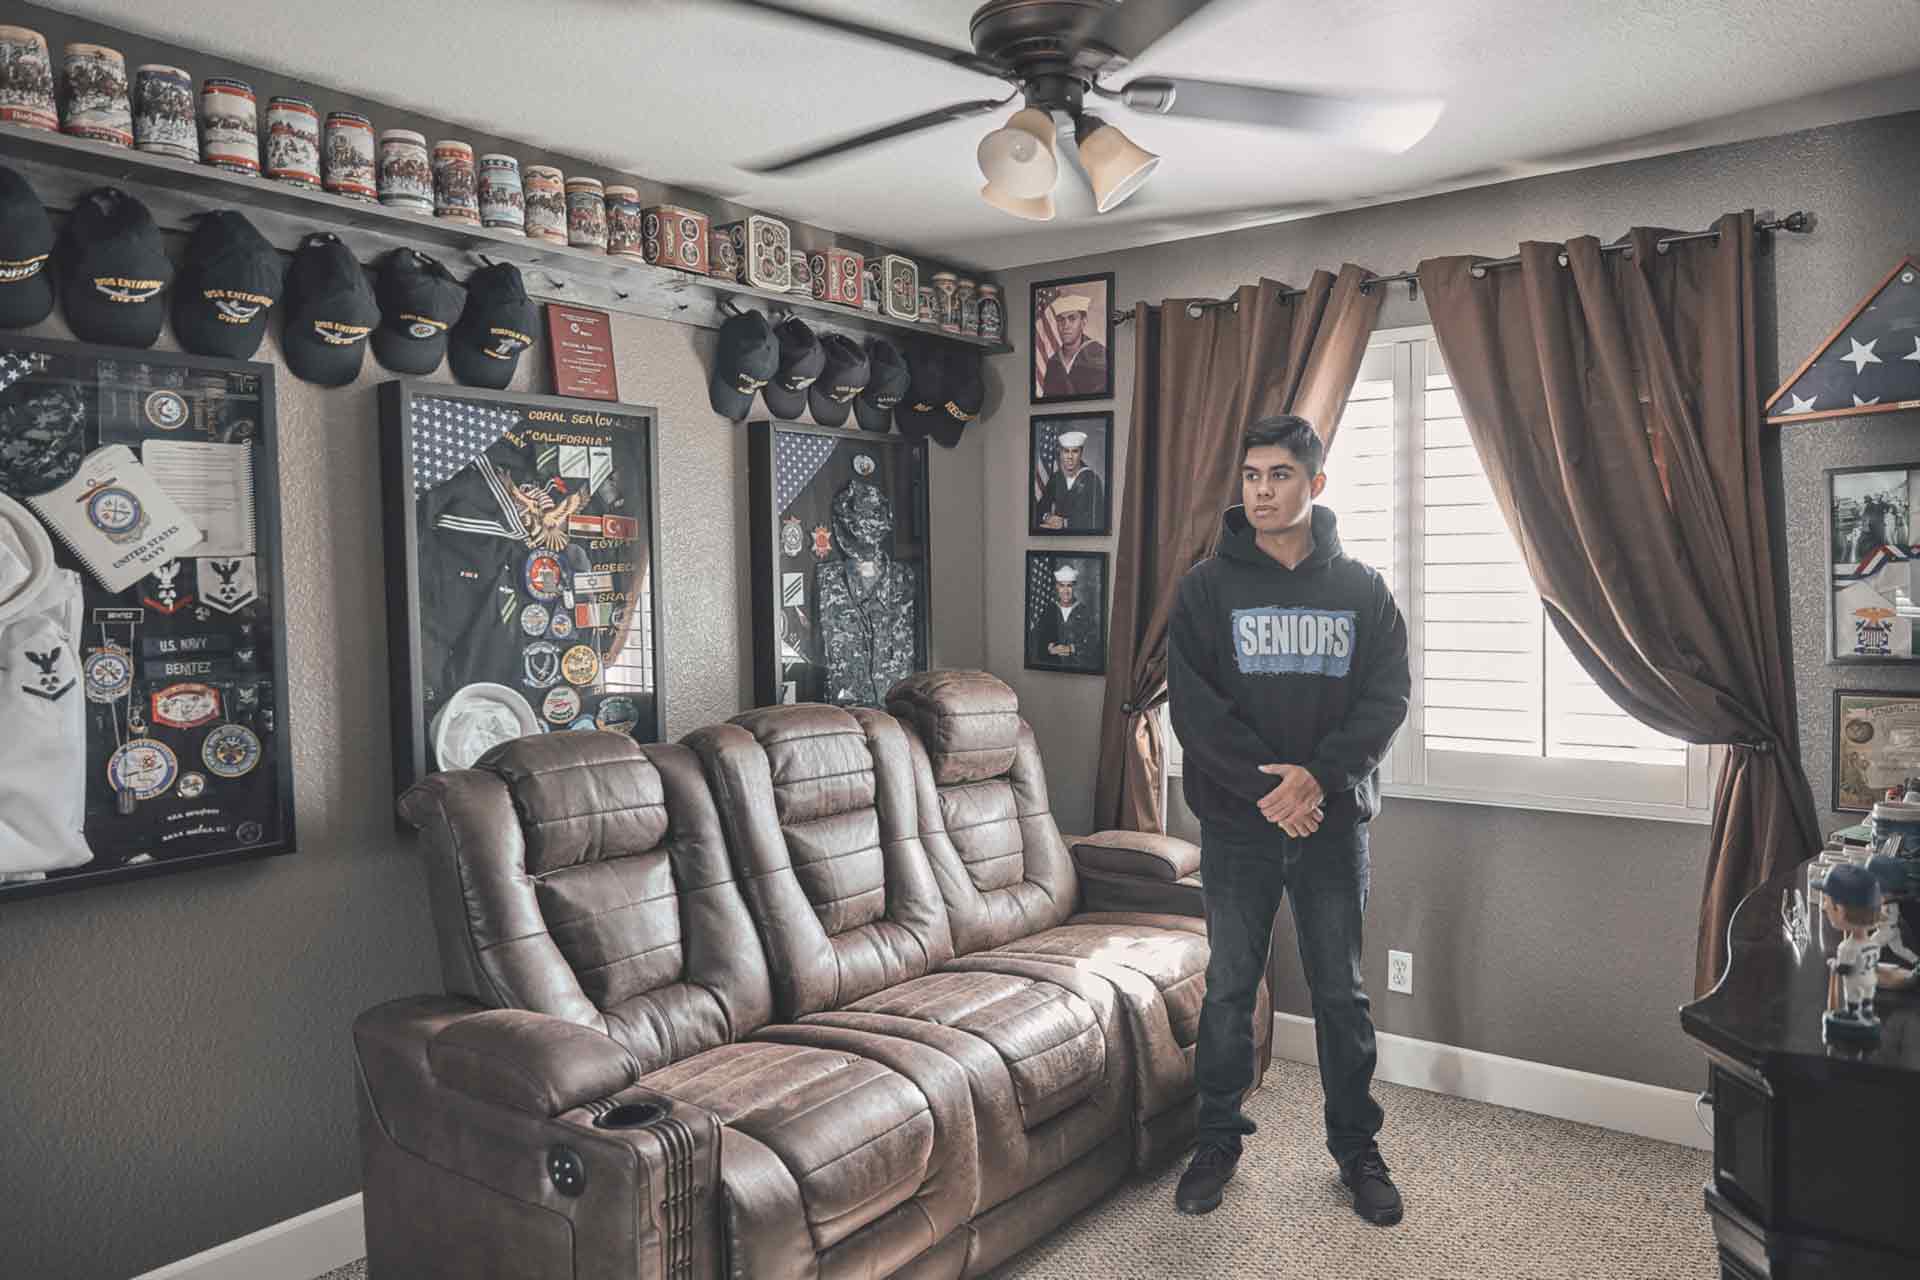 U.S. Navy Sailor Michael Benitez stands in a room at his house surrounded by Navy wall plaques and apparel